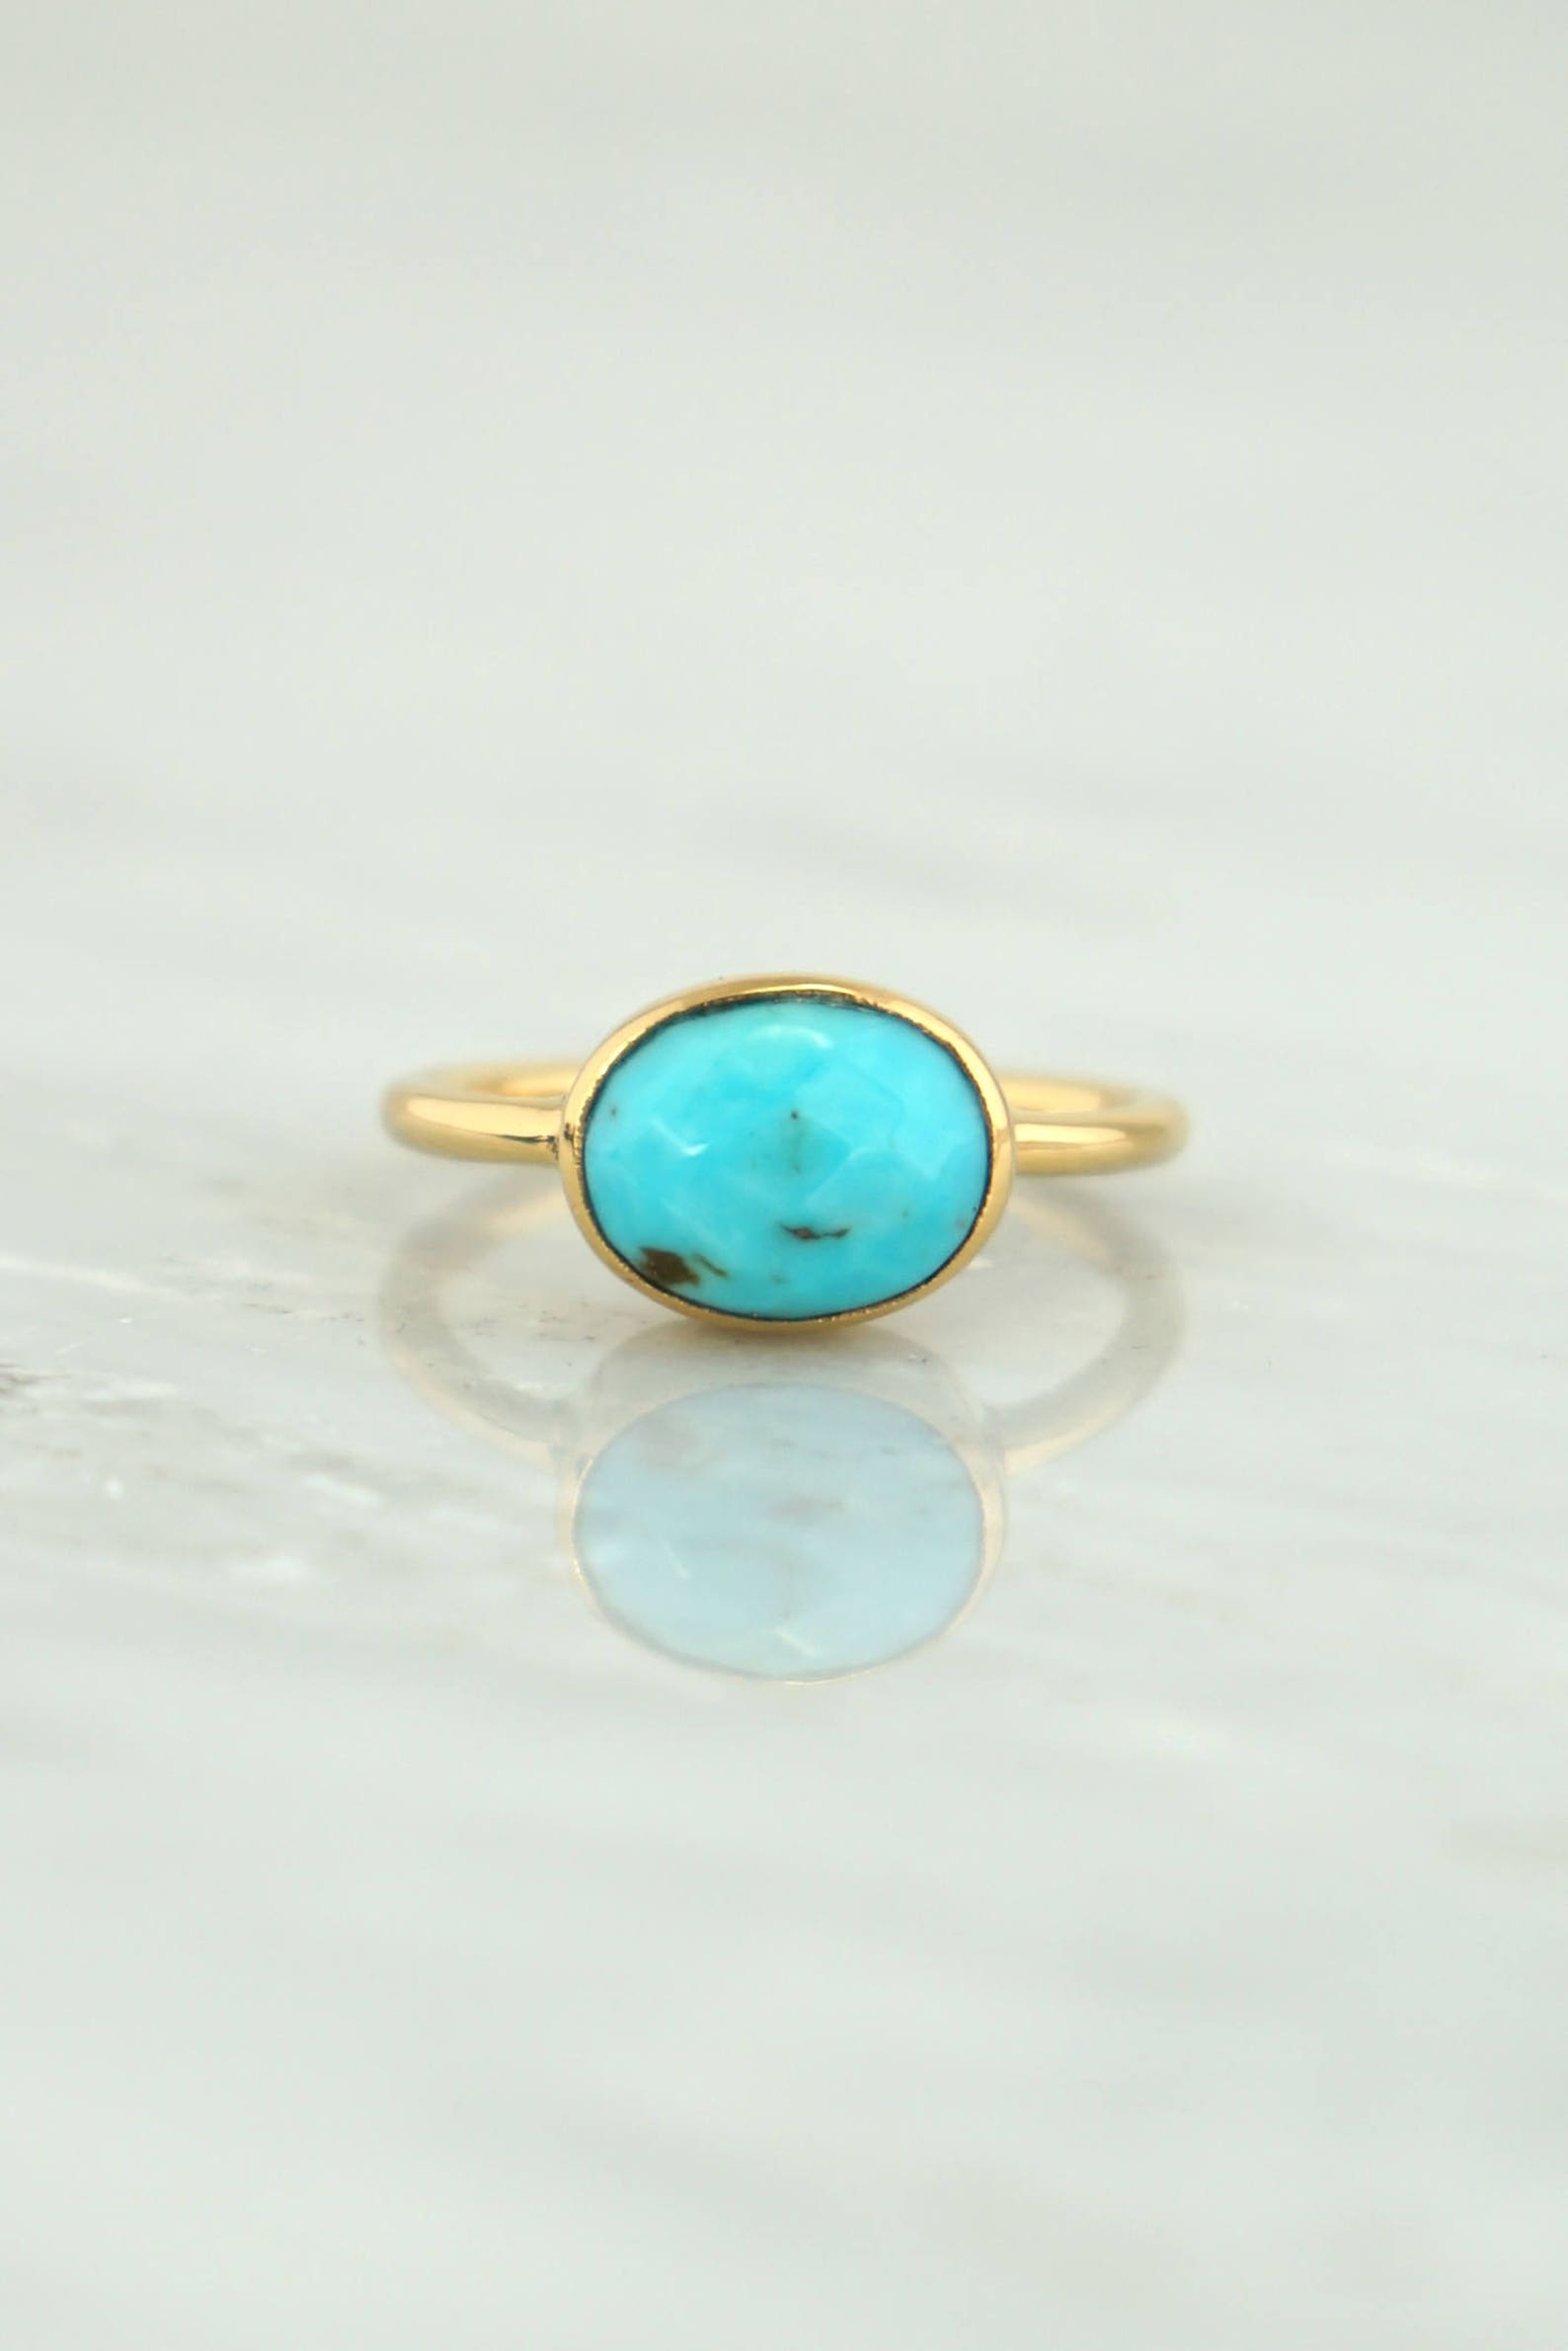 Jane Austen ring Turquoise Ring Oval Turquoise Ring | Etsy